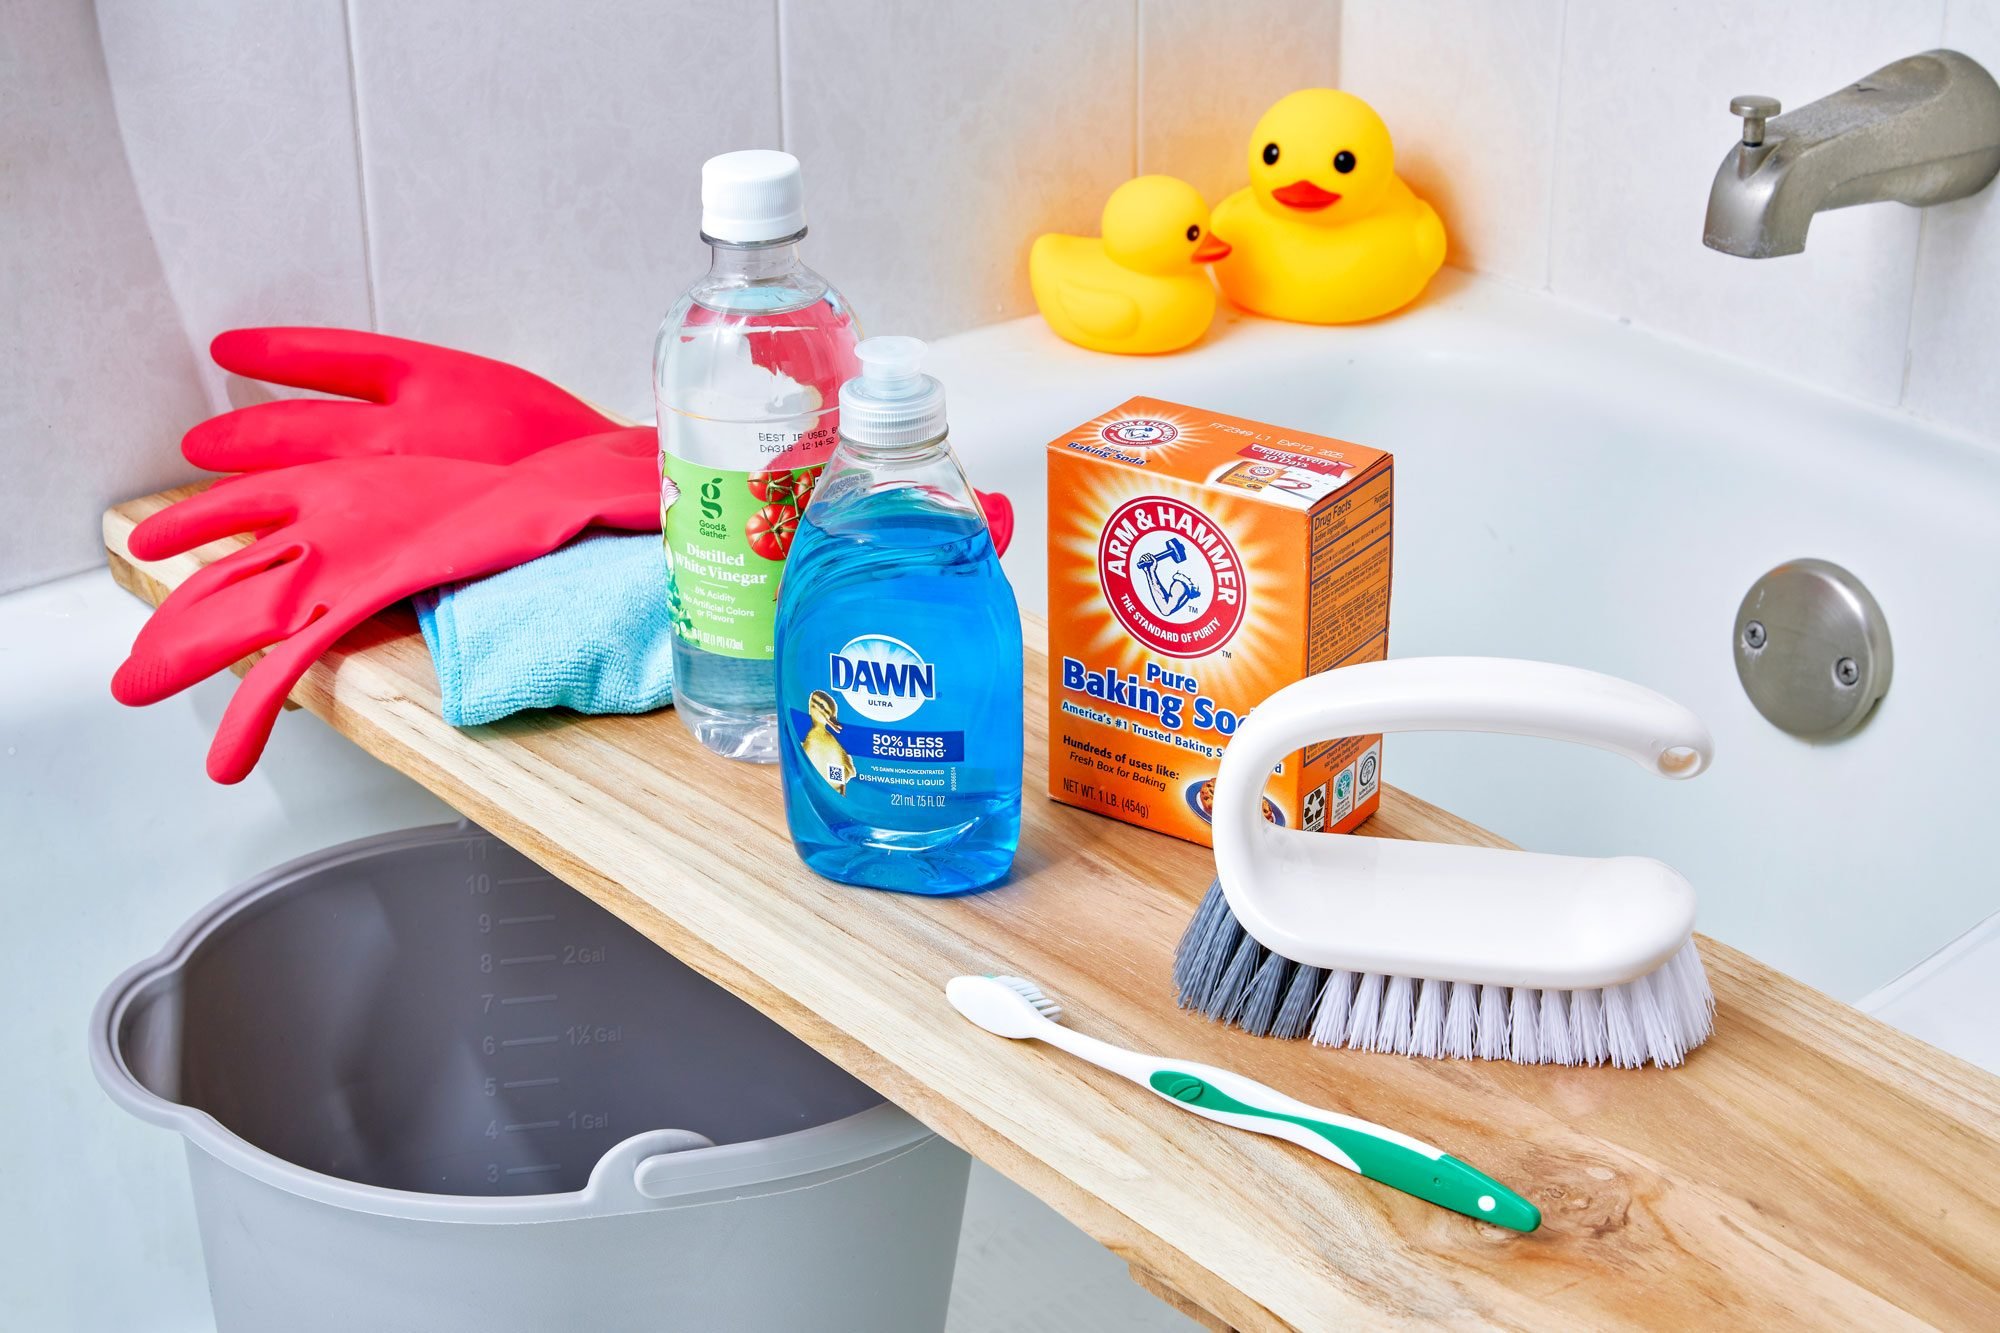 https://www.rd.com/wp-content/uploads/2023/02/How-to-Clean-a-Bathtub-RDD23_CleaningHub_KS_03_10_018-supplies-FT.jpg?fit=700%2C1024